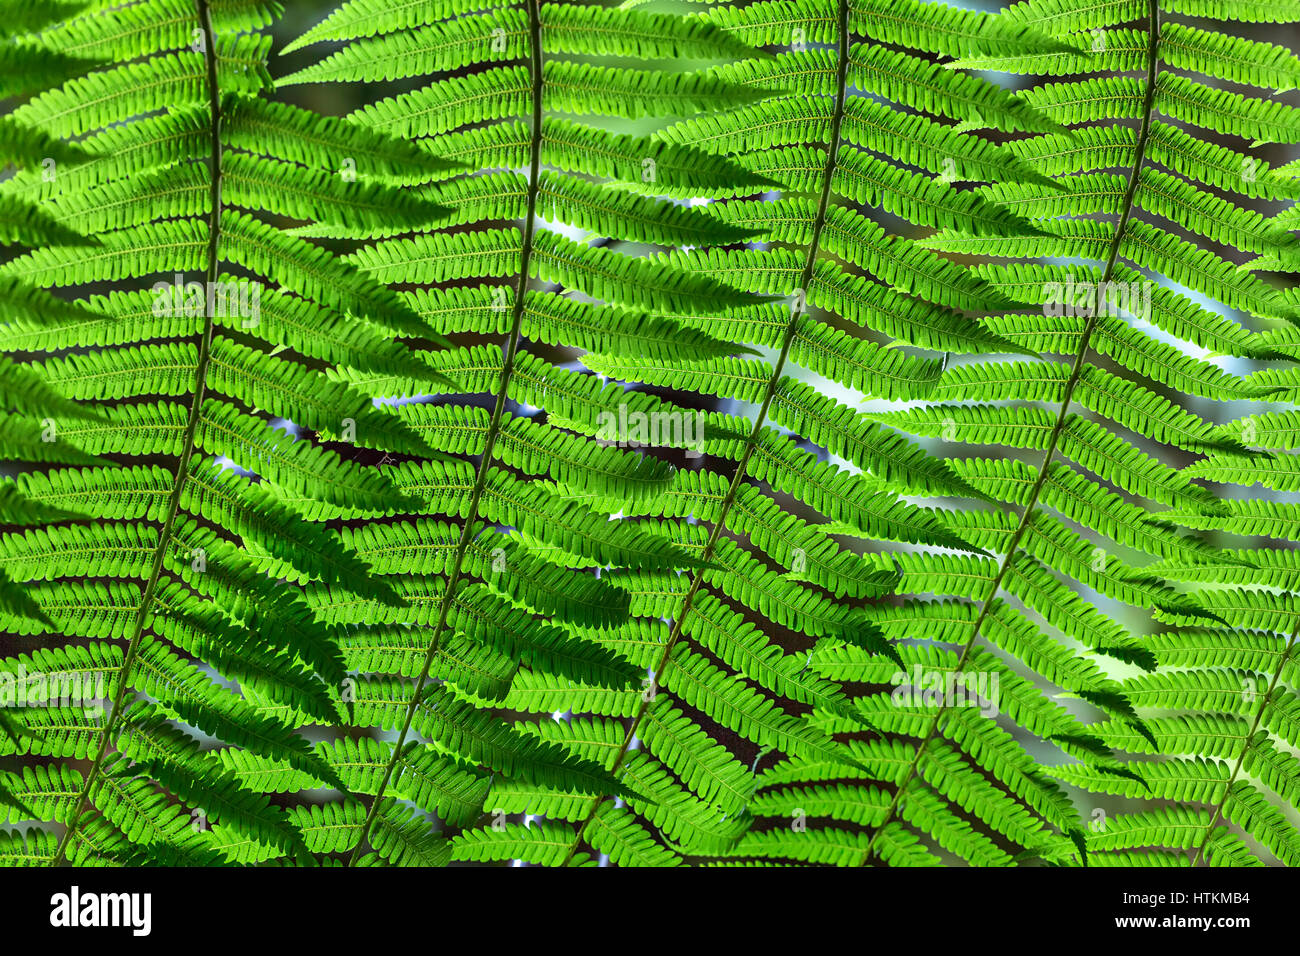 Nice fern branch with green leaves on the blurry background. Closeup photo. Horizontal. Stock Photo